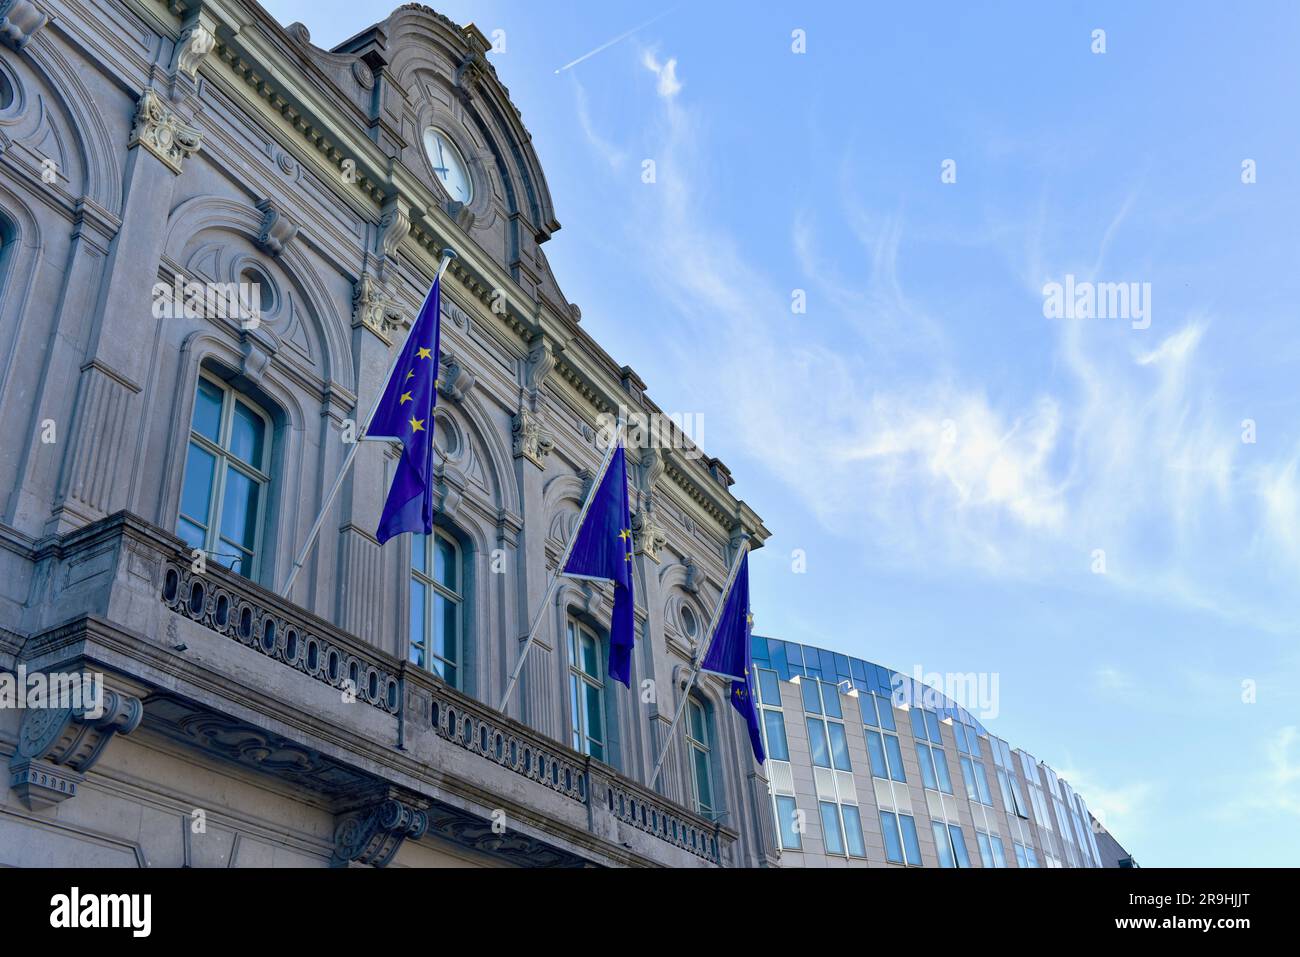 European Parliament Infopoint building on Place du Luxembourg, Brussels Stock Photo